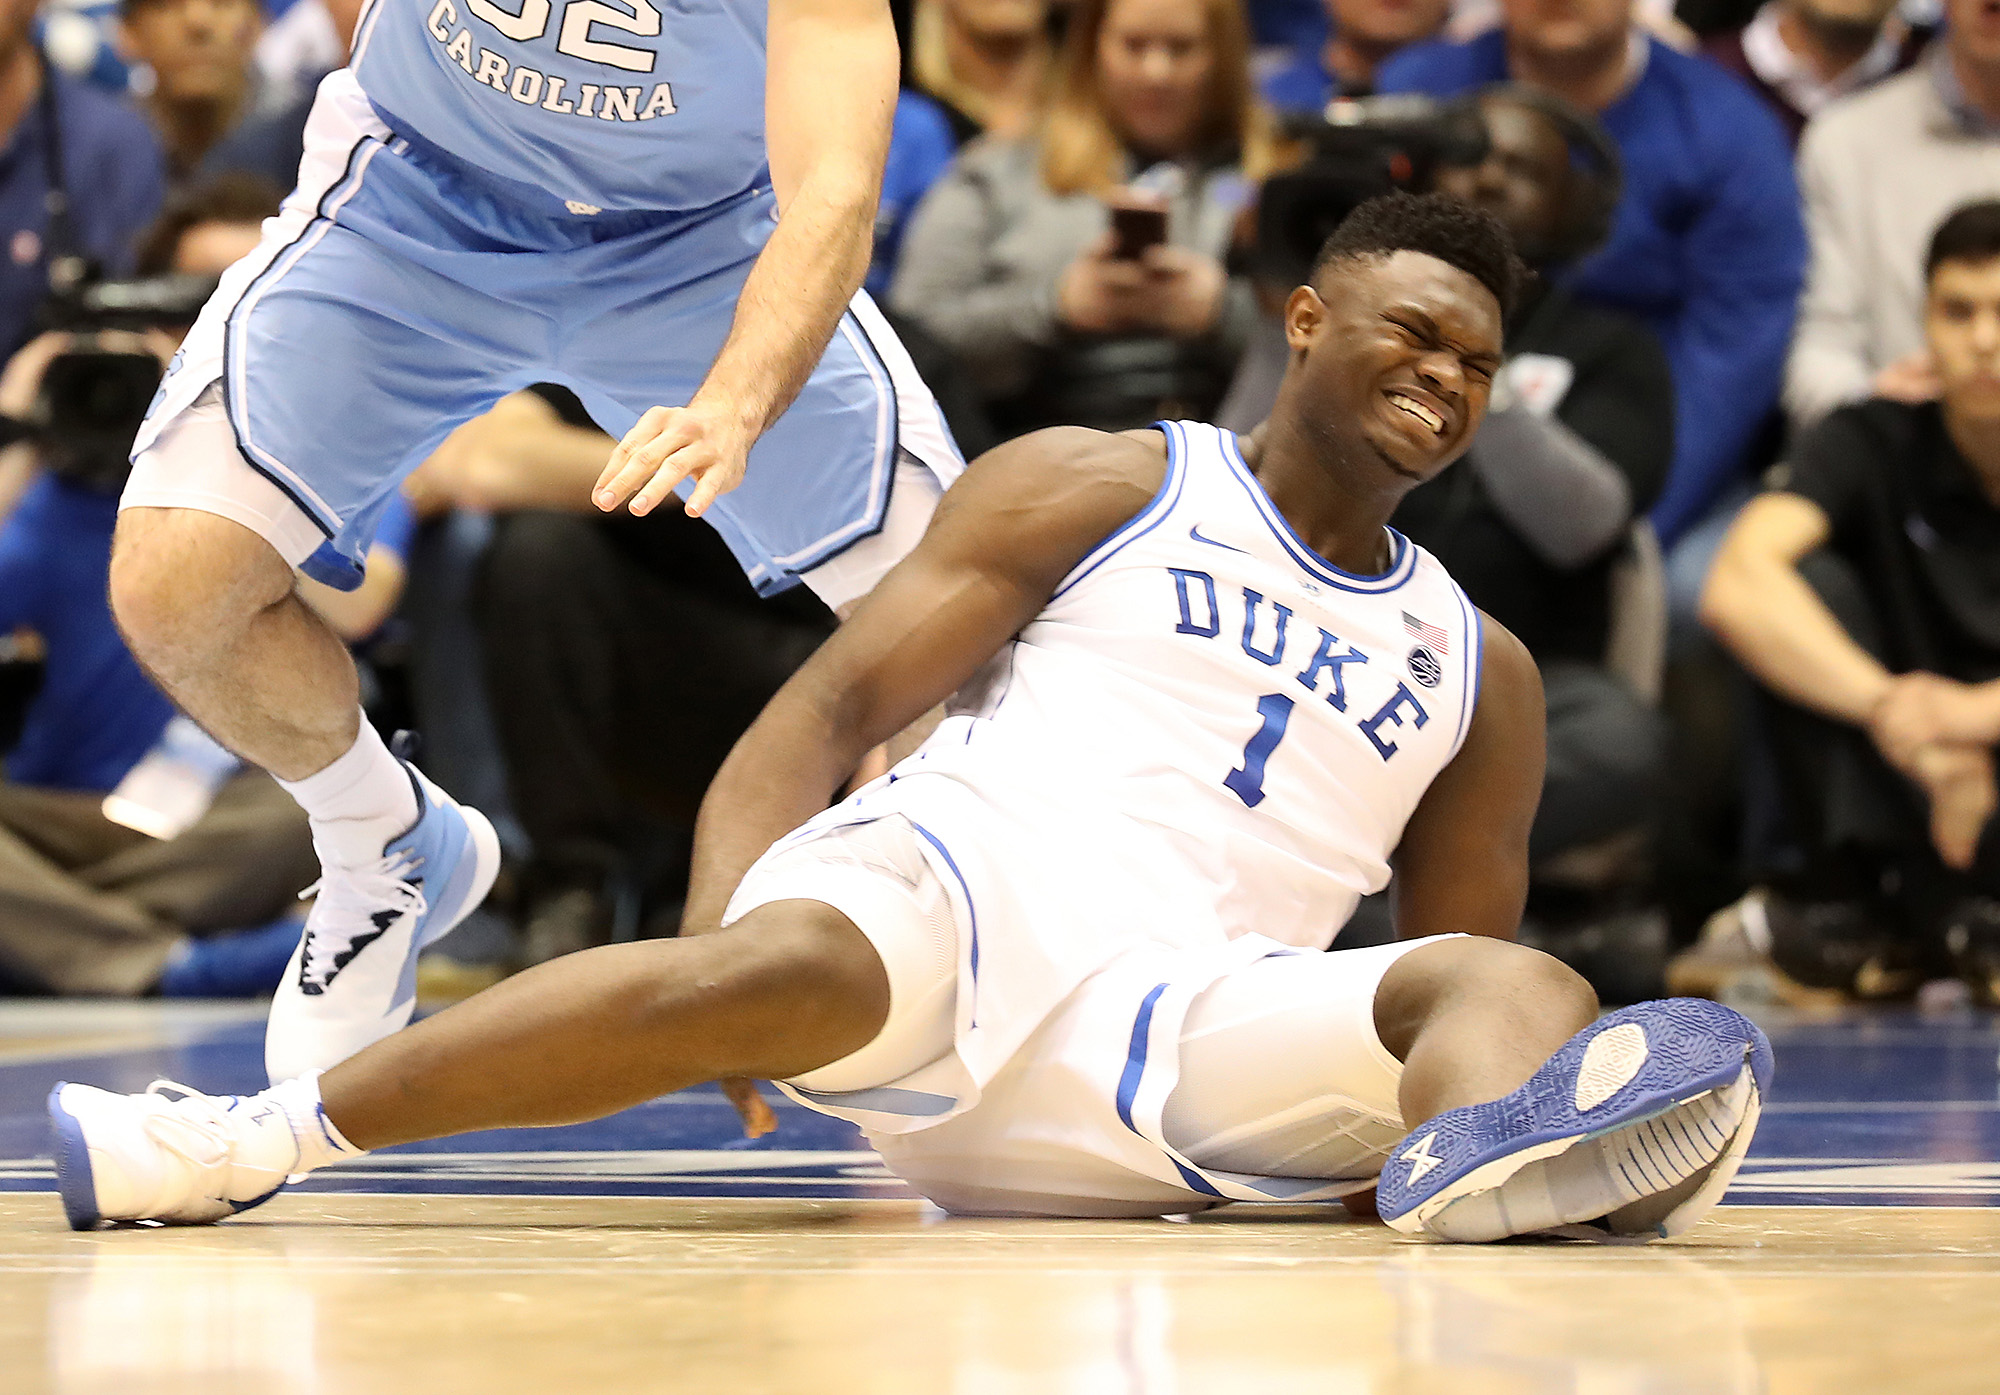 How Nike Made Sure Zion Williamson Wouldn't Explode Another Shoe